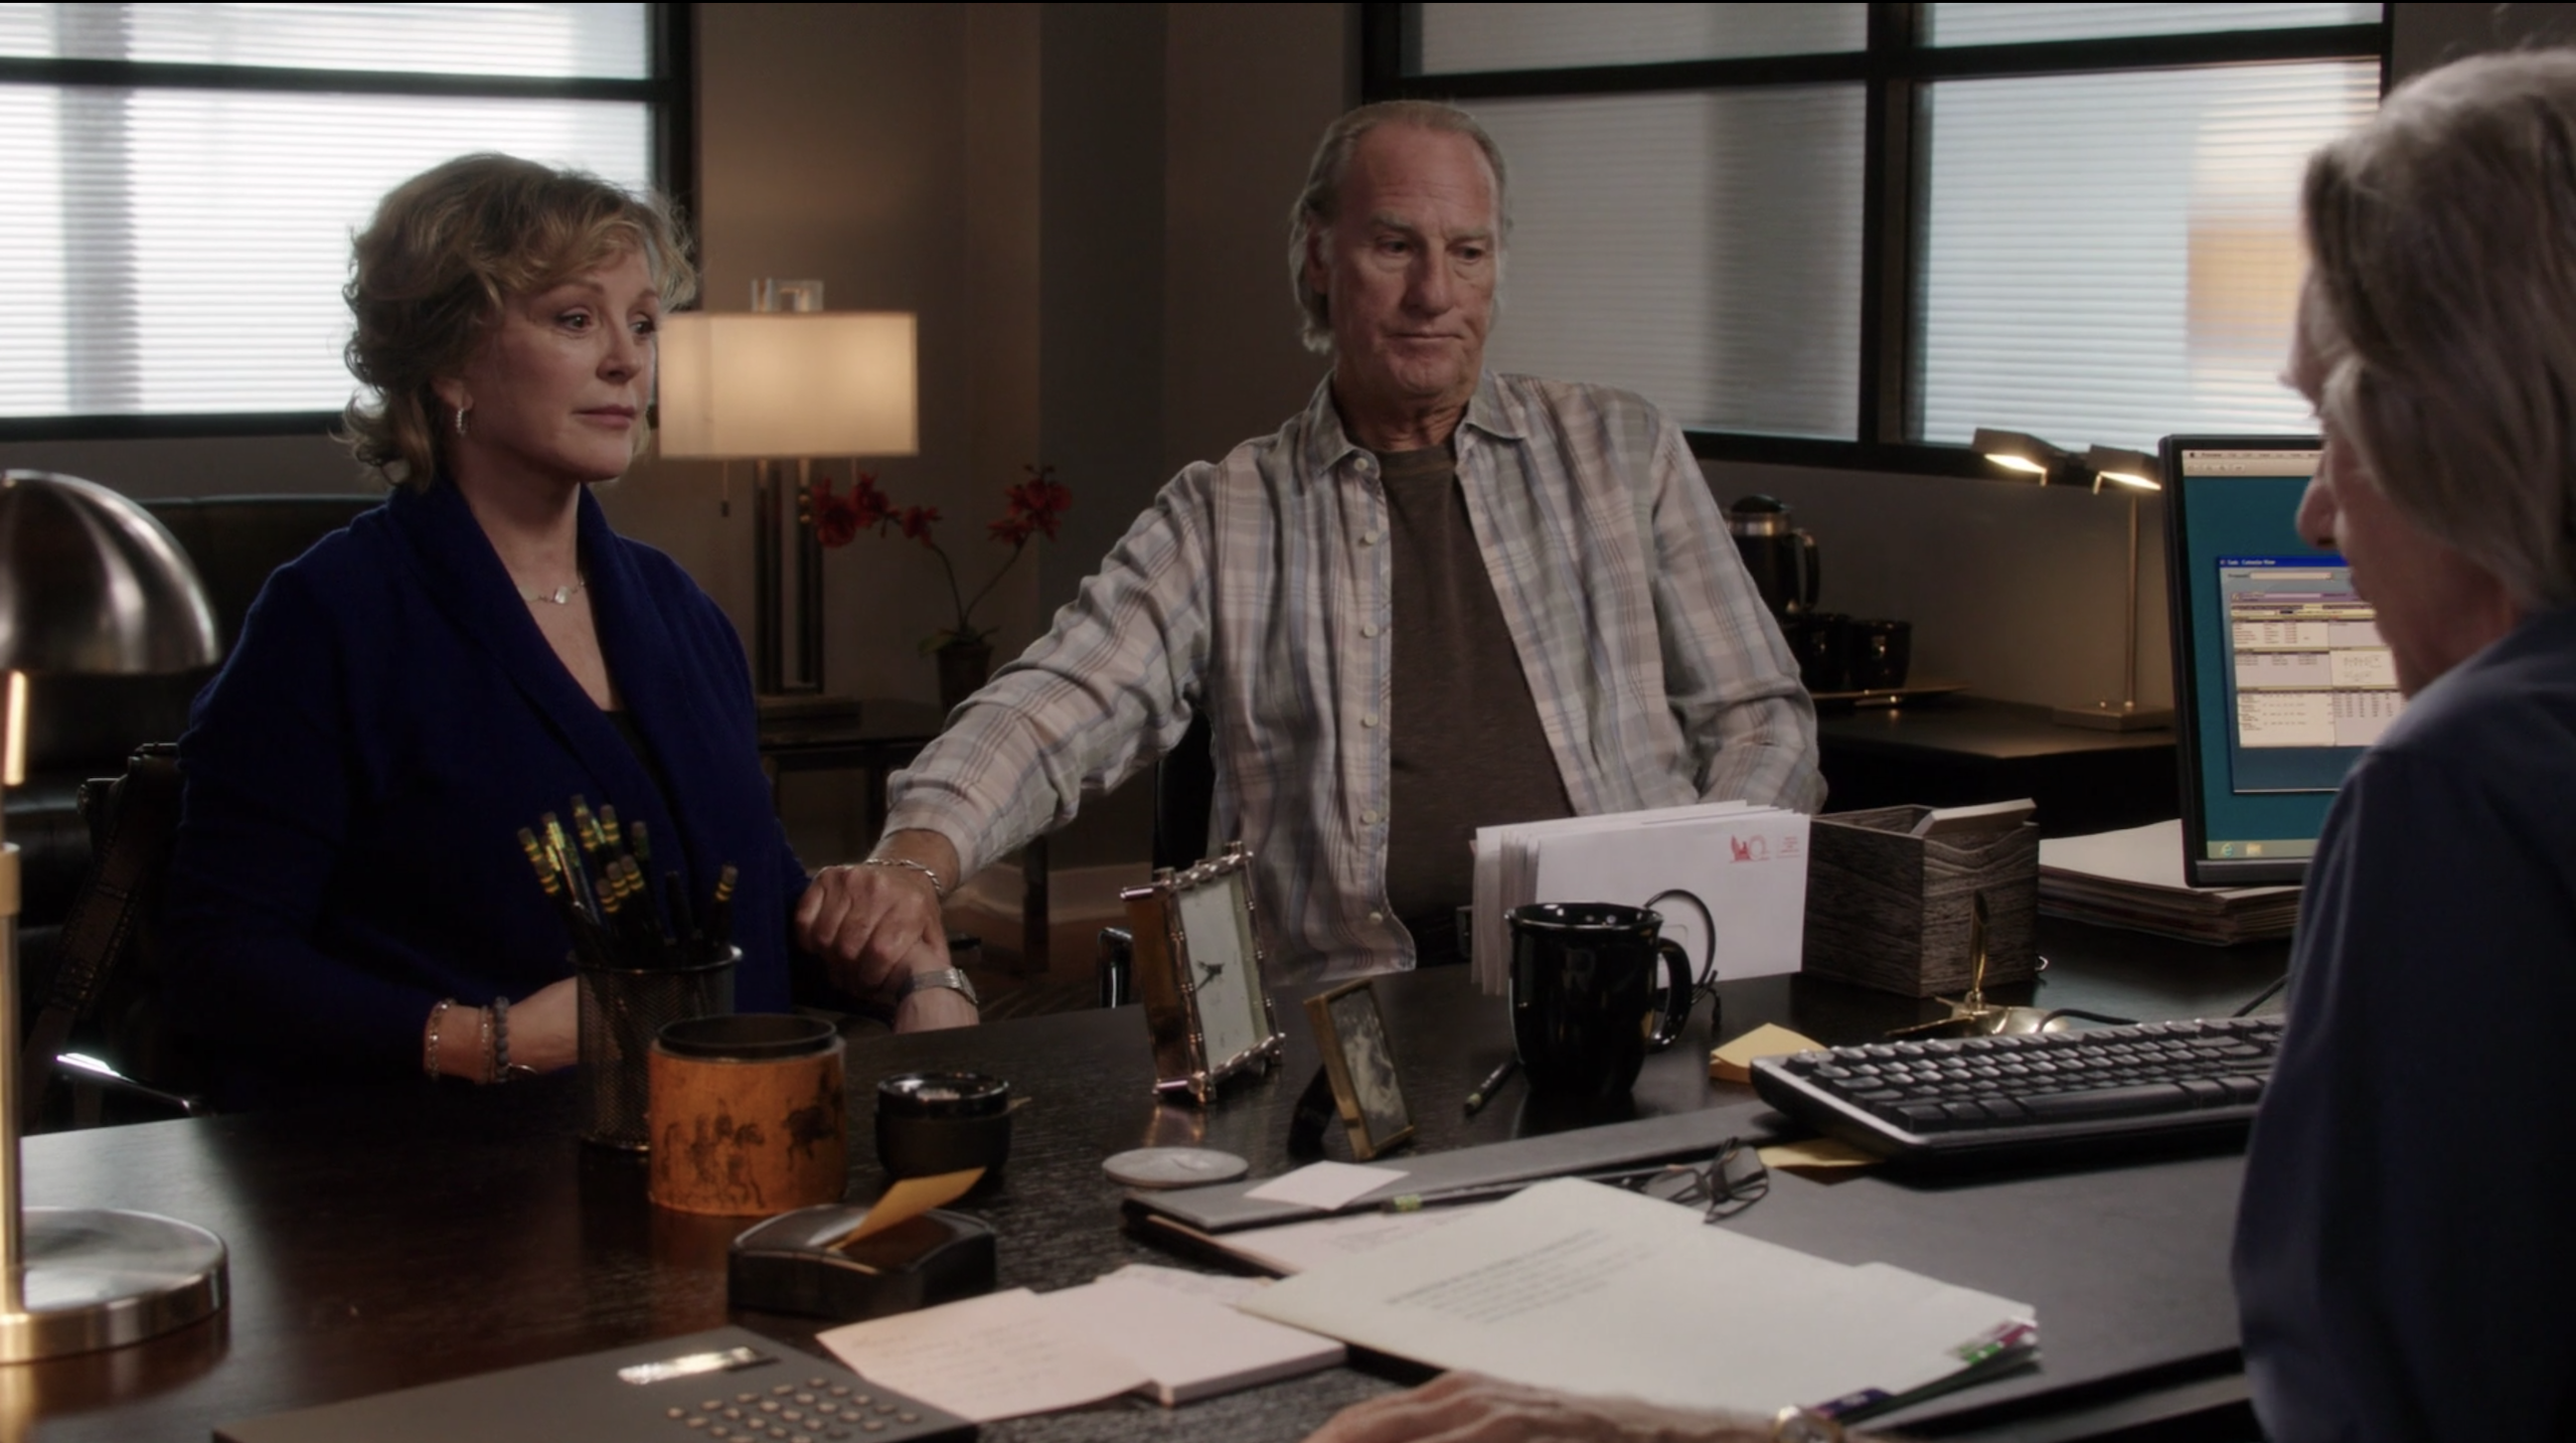 Craig T Nelson and Bonnie Bedelia sit in an office together